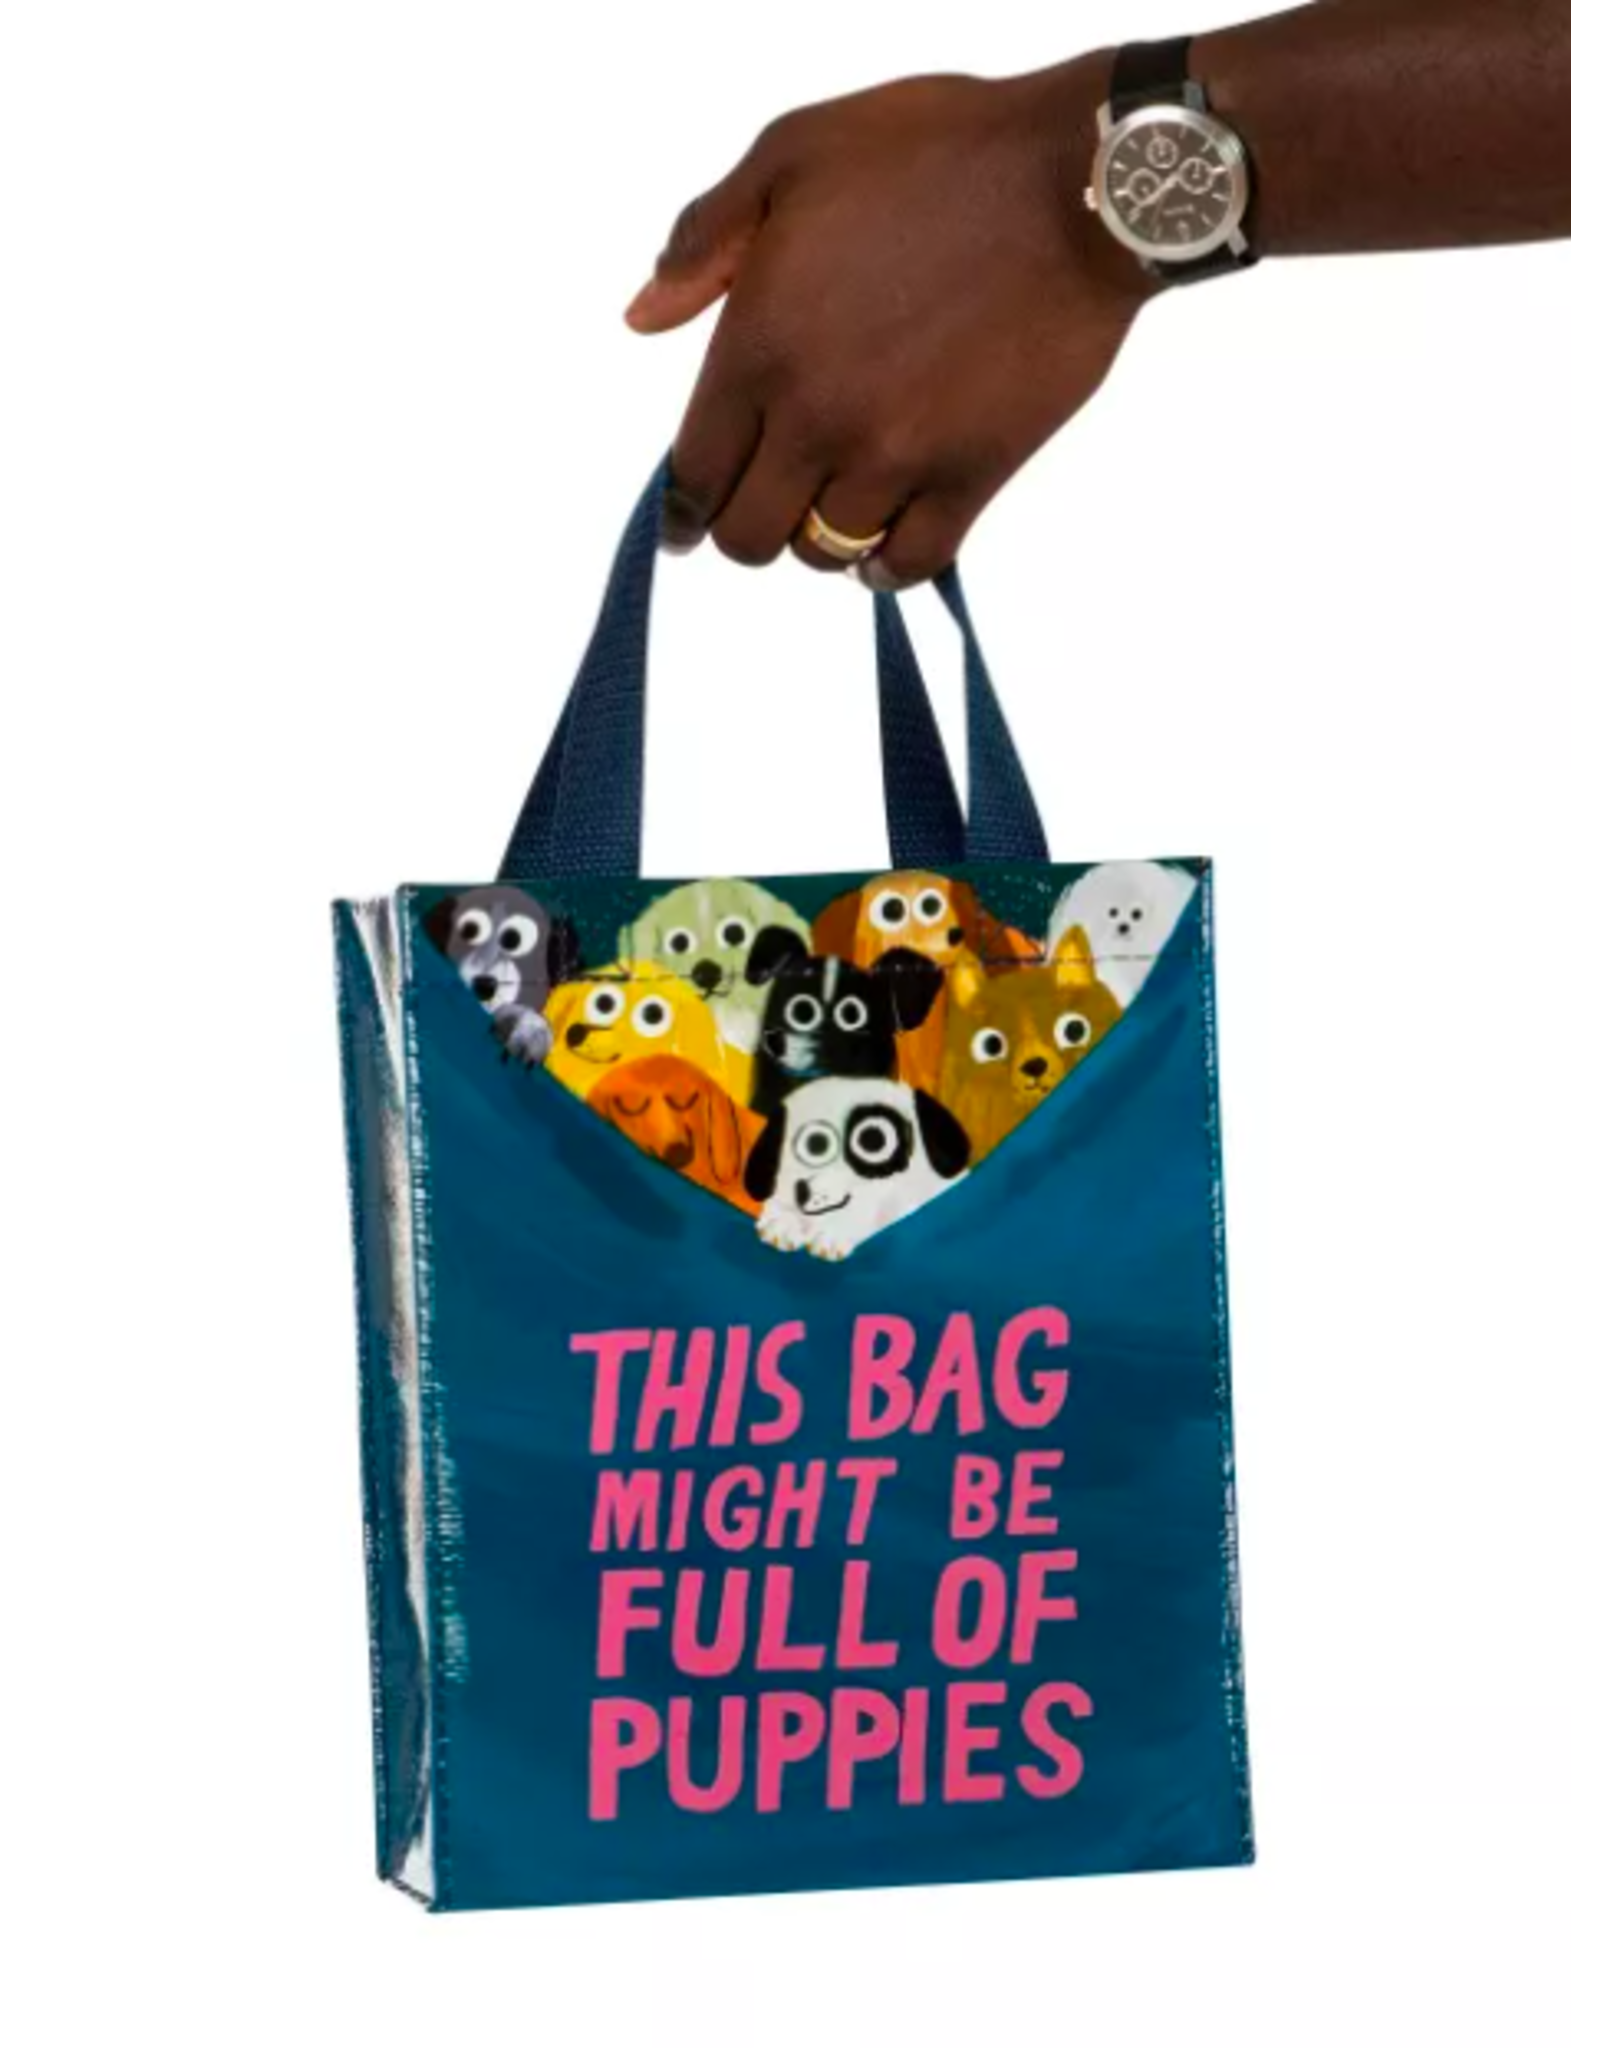 BGS Blue Q - Small Tote / This Bag Might Be Full of Puppies